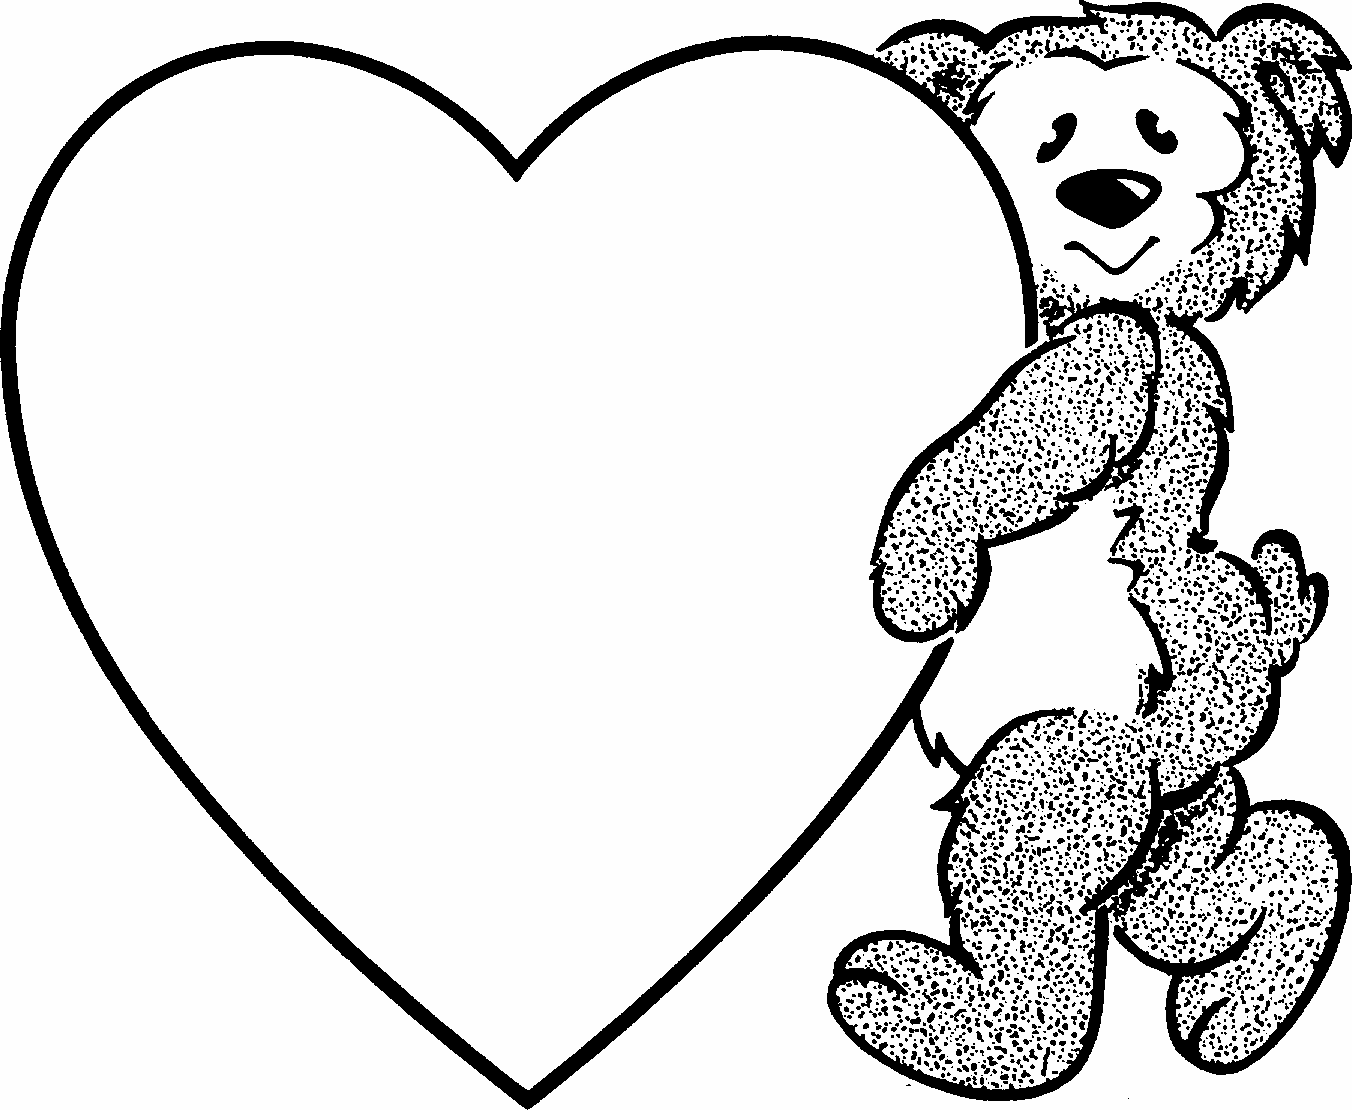 heart printable coloring pages coloring pages hearts free printable coloring pages for printable heart coloring pages 